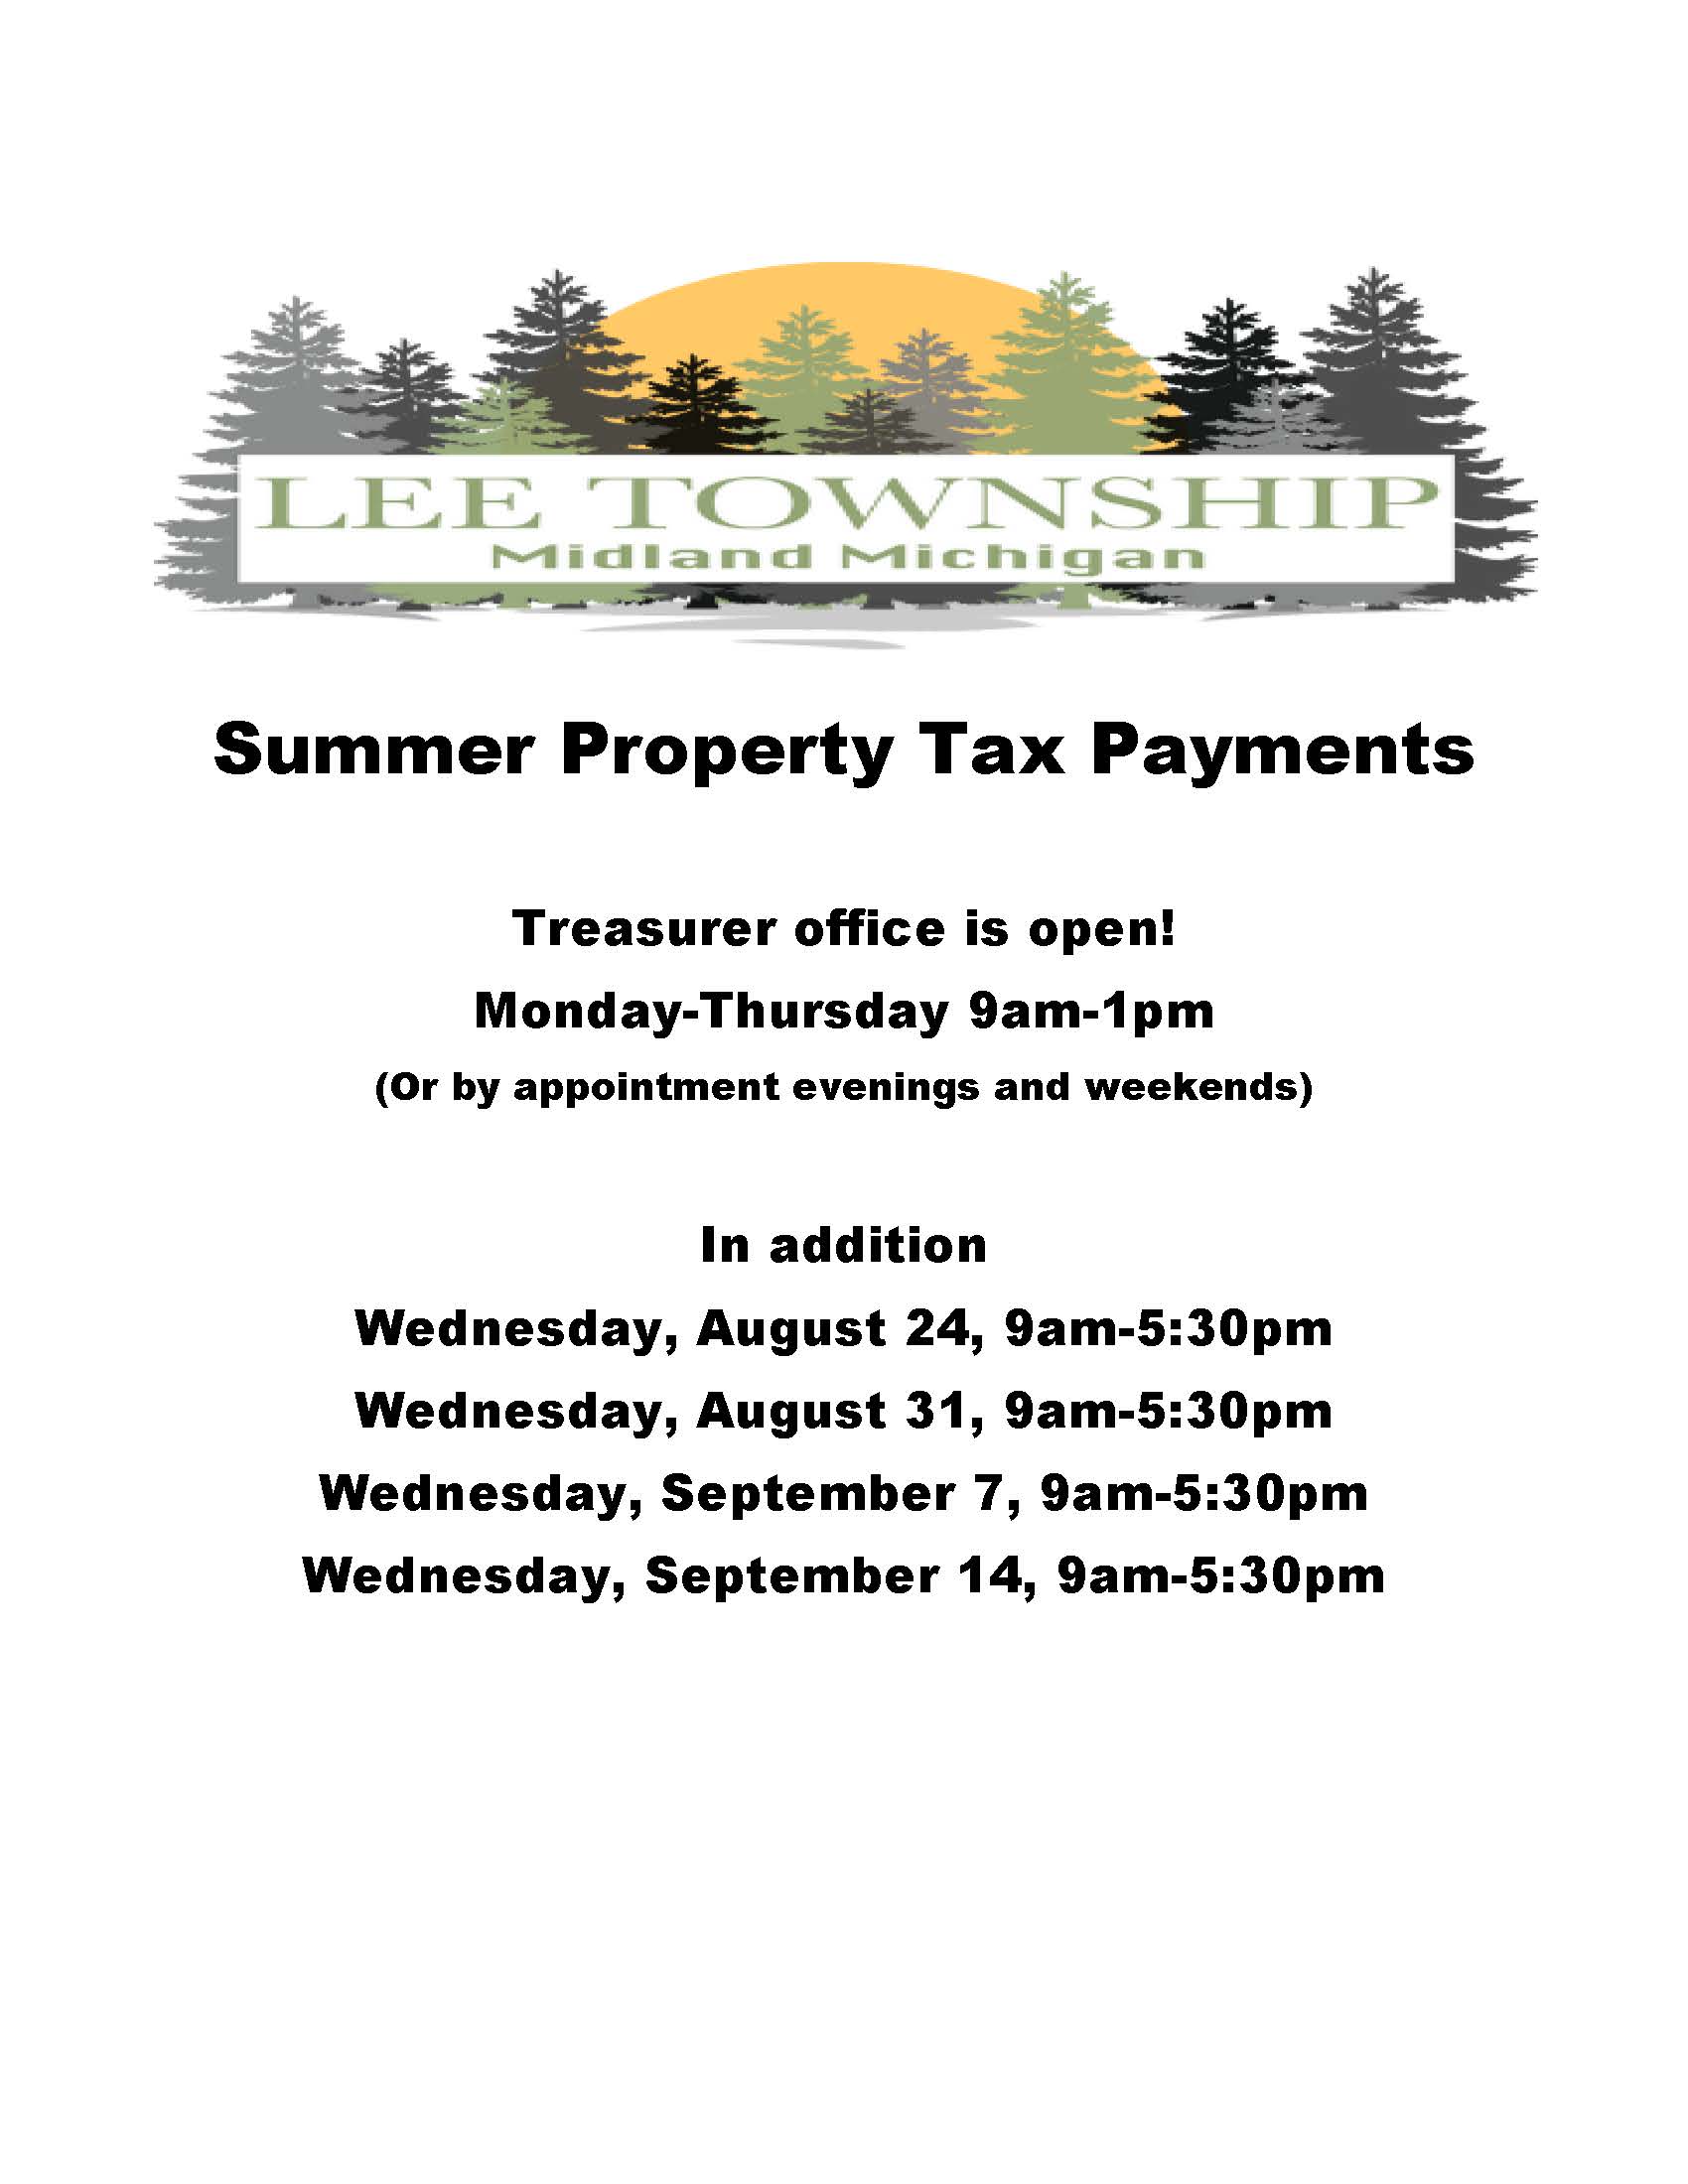 Summer Property Tax Payment Schedule